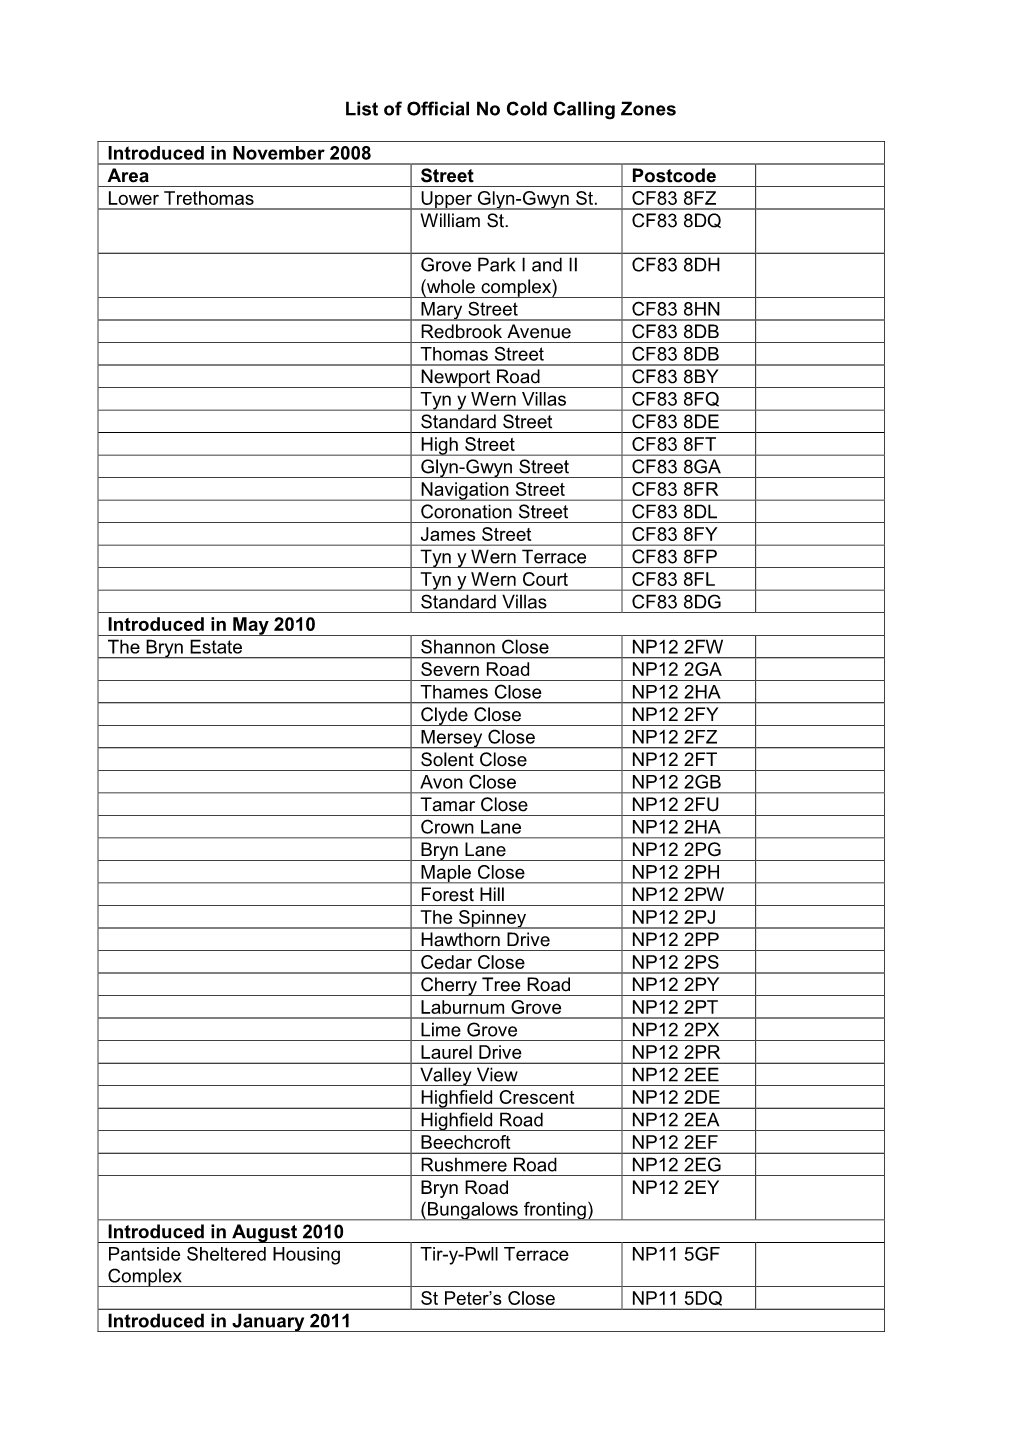 List of Official No Cold Calling Zones Introduced in November 2008 Area Street Postcode Lower Trethomas Upper Glyn-Gwyn St. CF